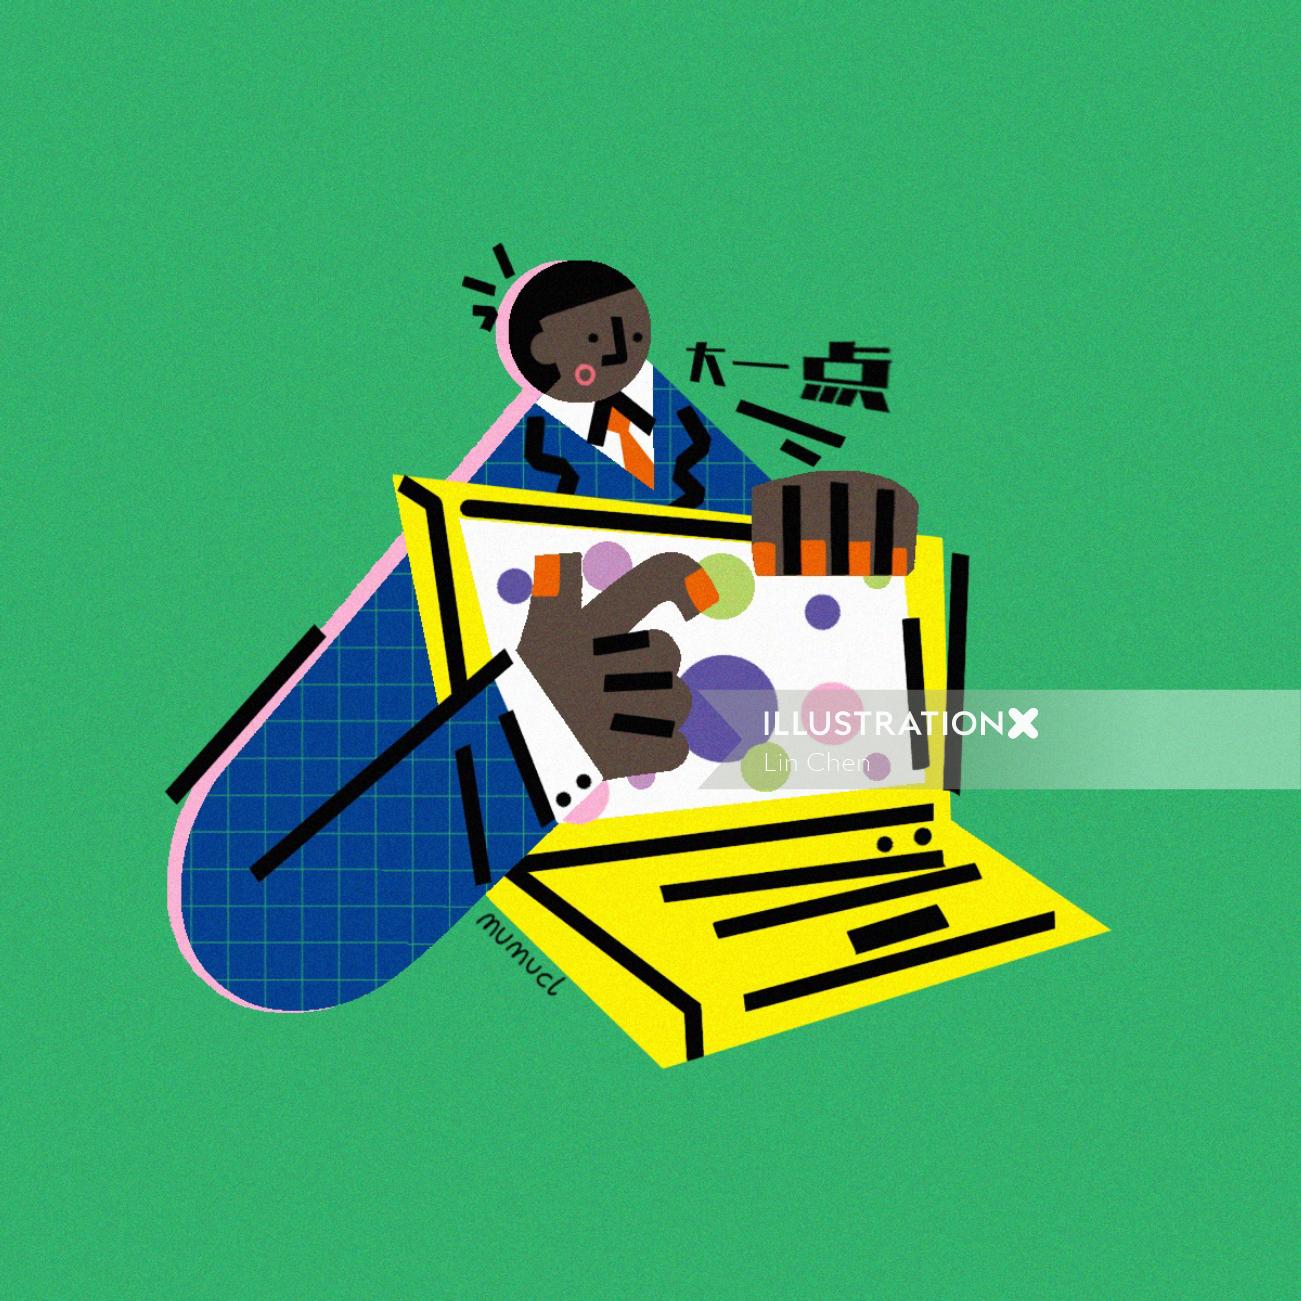 Graphic businessman with laptop
